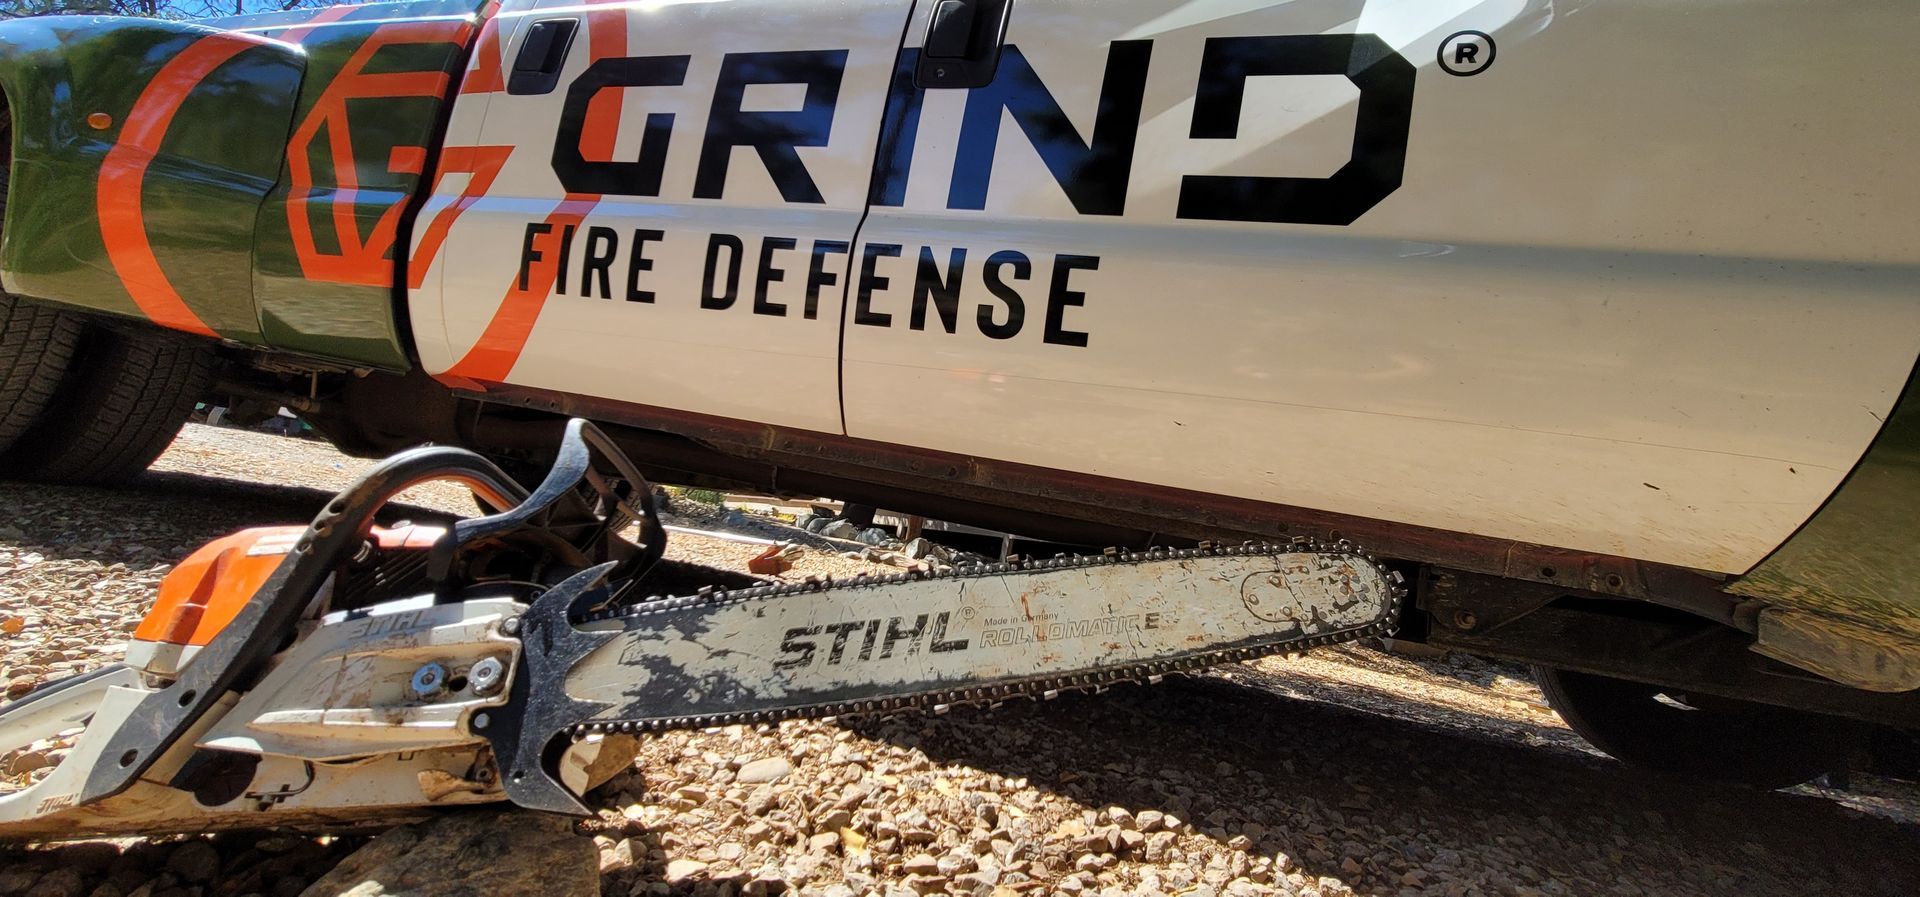 Grind Fire Defense truck and chainsaw for tree removal